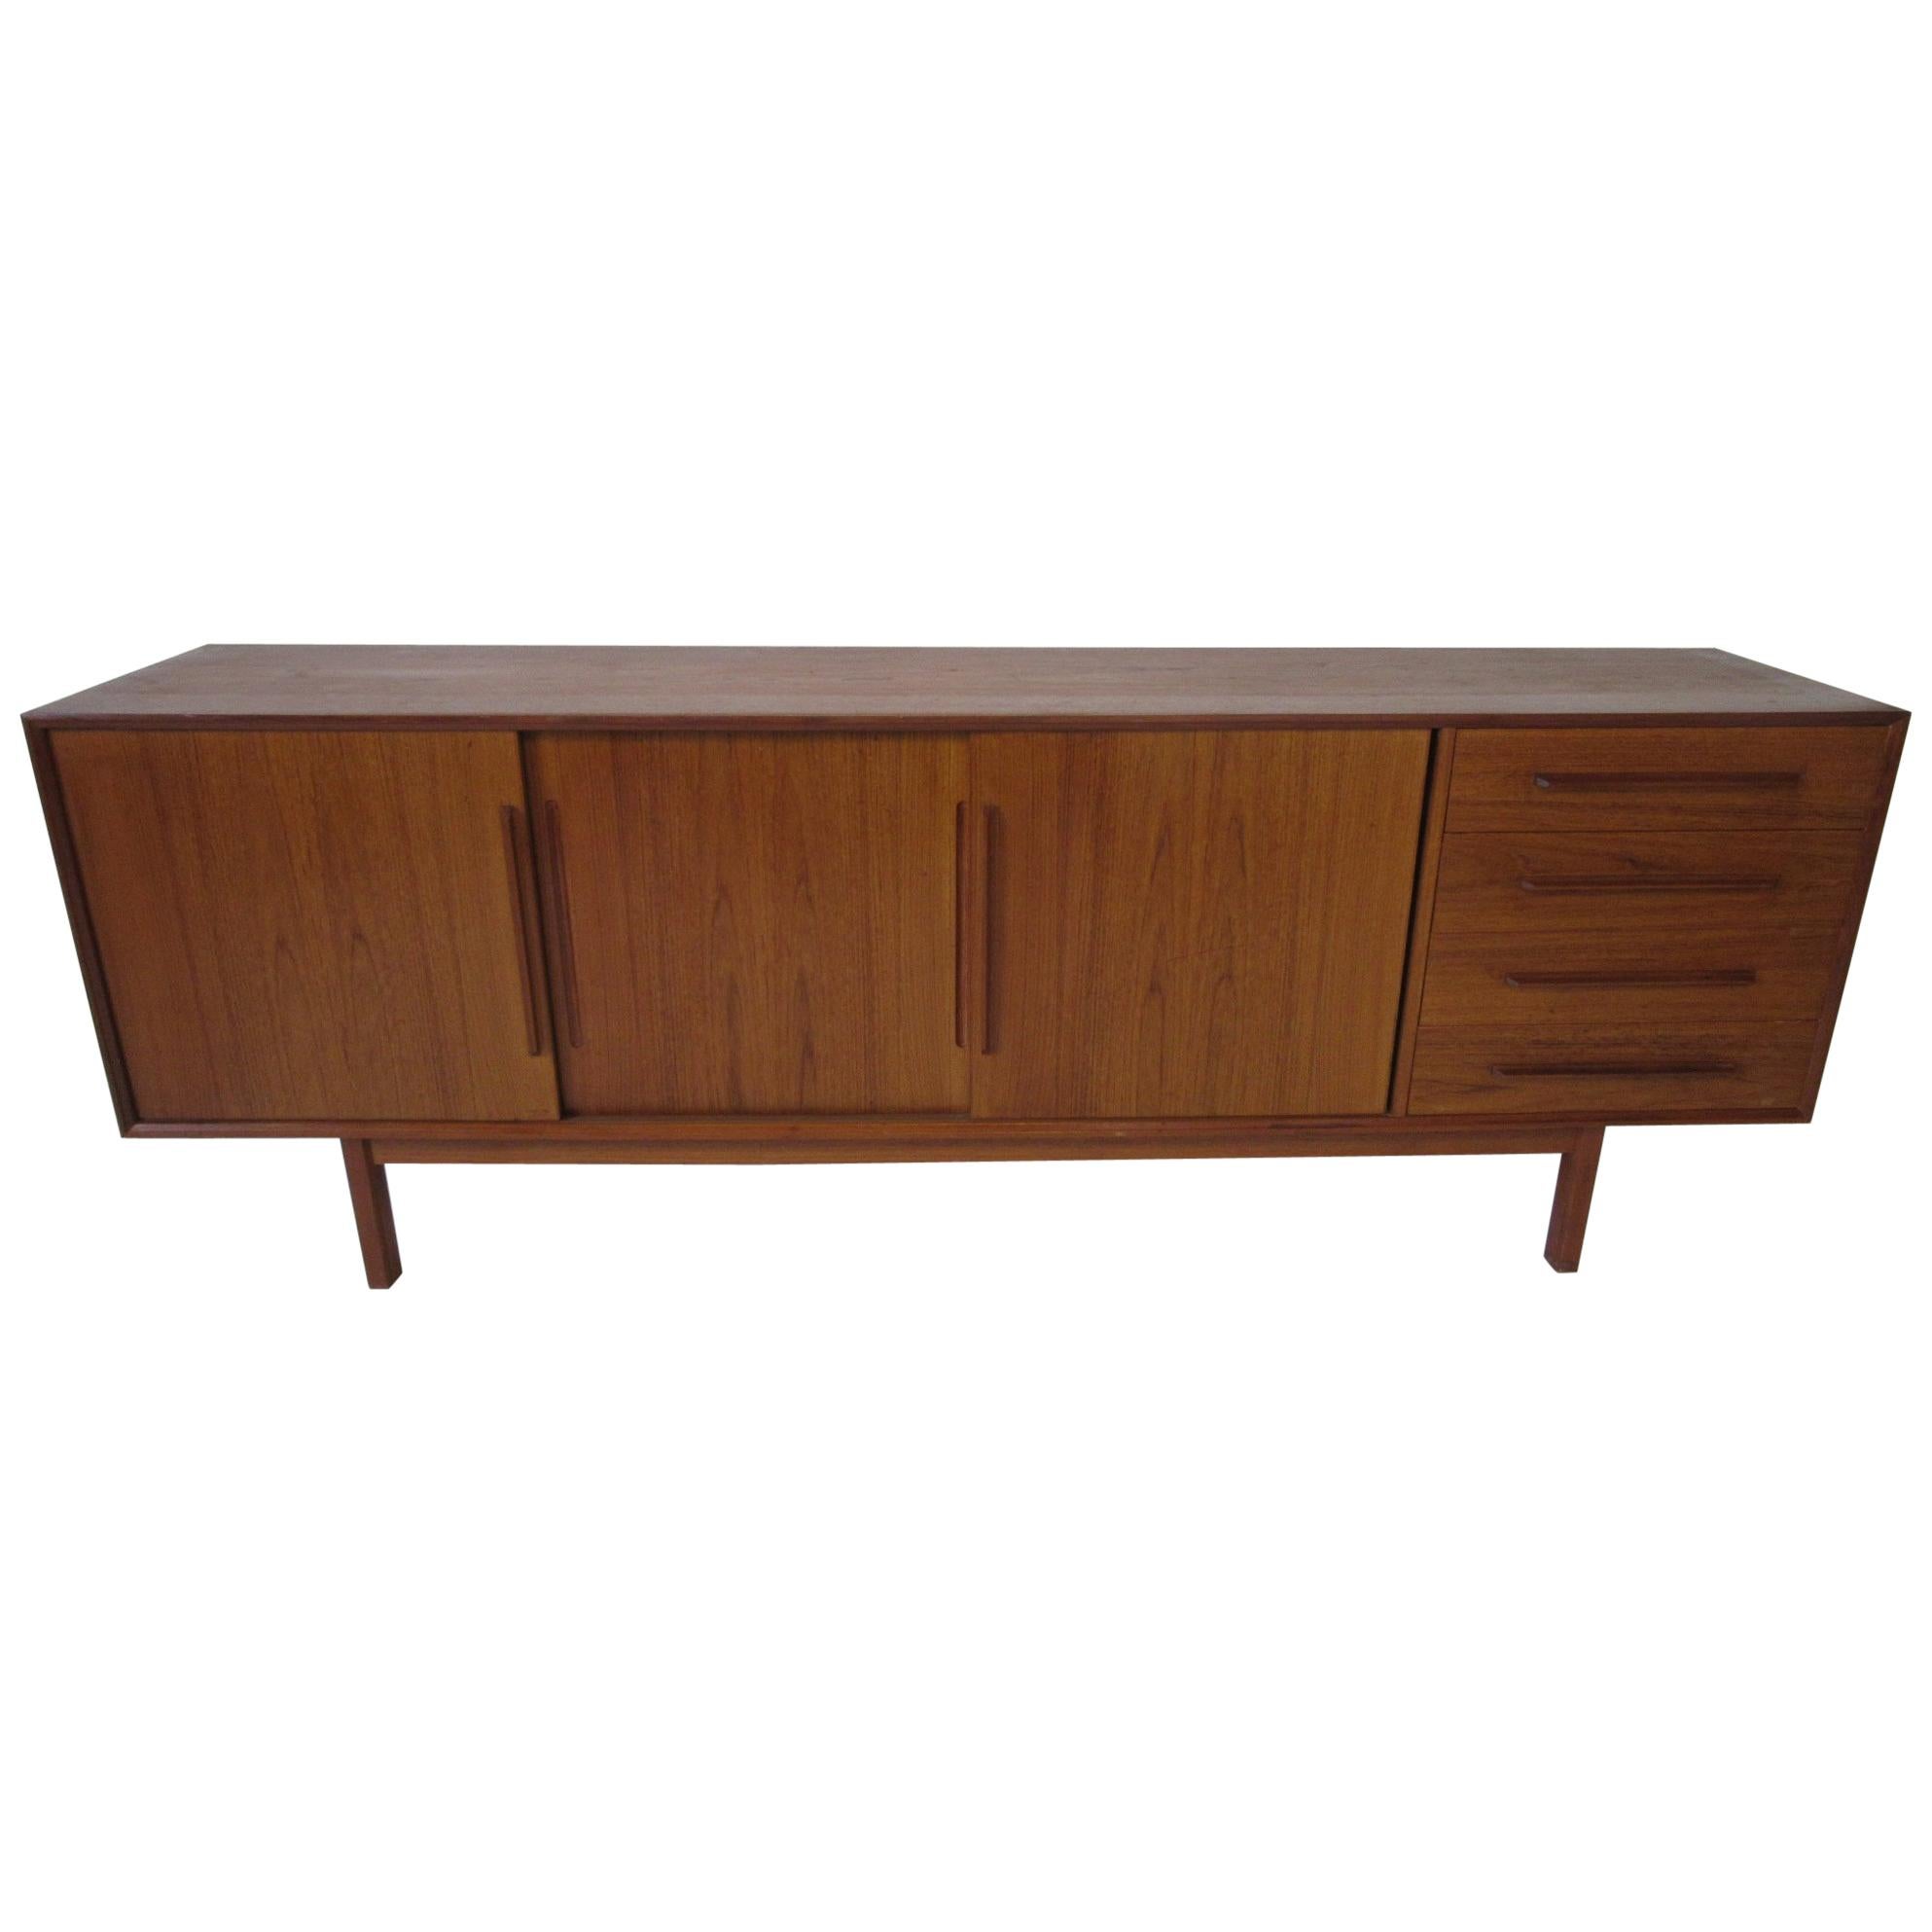 Long Danish Credenza or Sideboard in the style of IB Kofod-Larsen